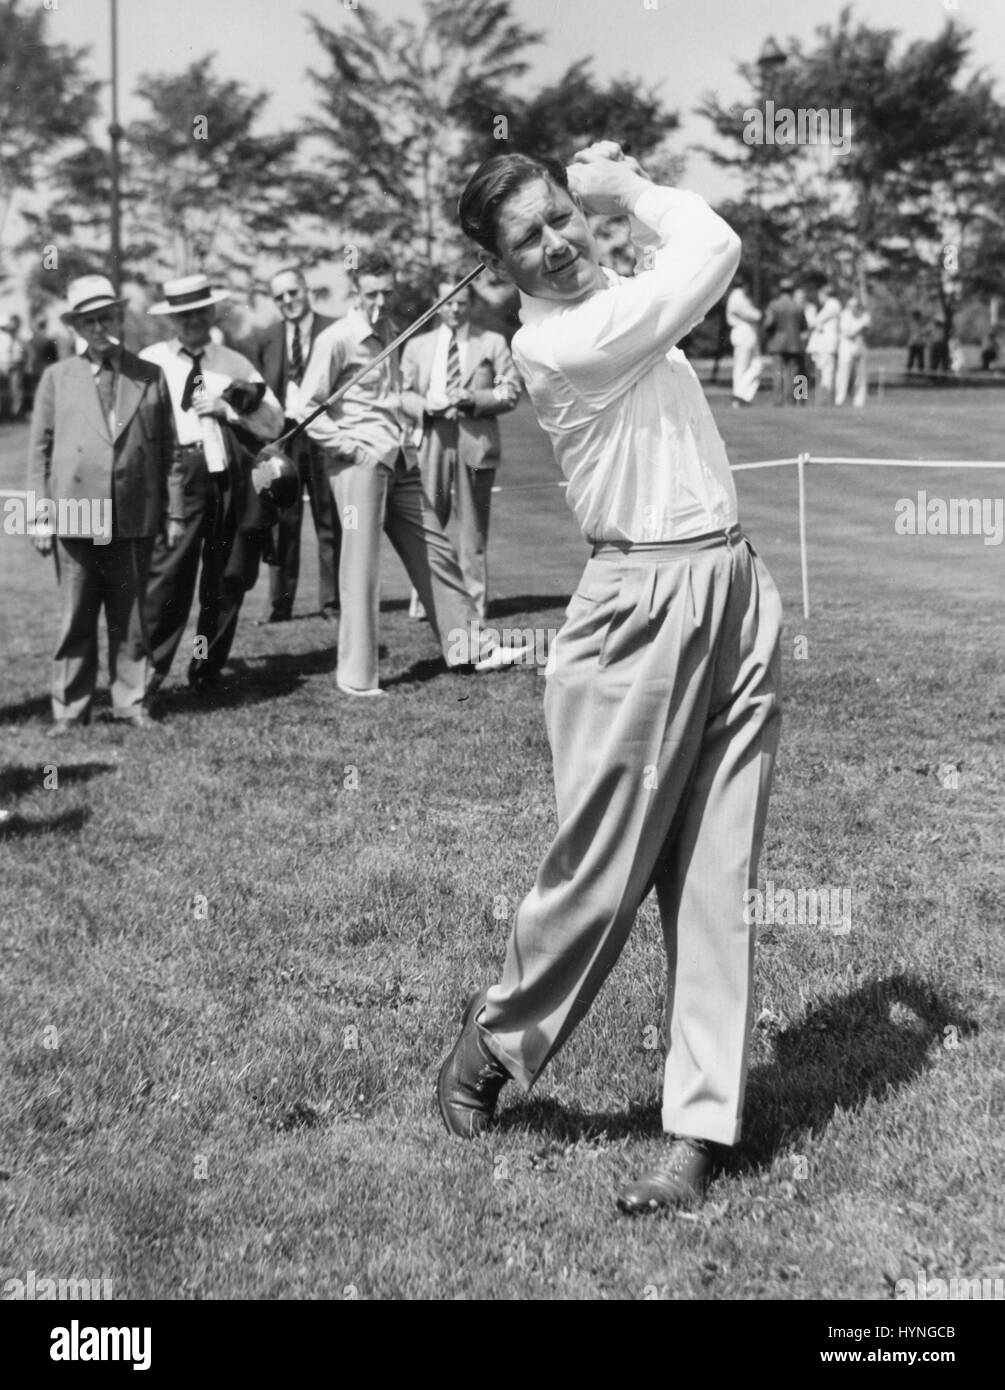 Professional golfer Byron Nelson driving a golf ball during an exhibition match. Circa 1940. Stock Photo